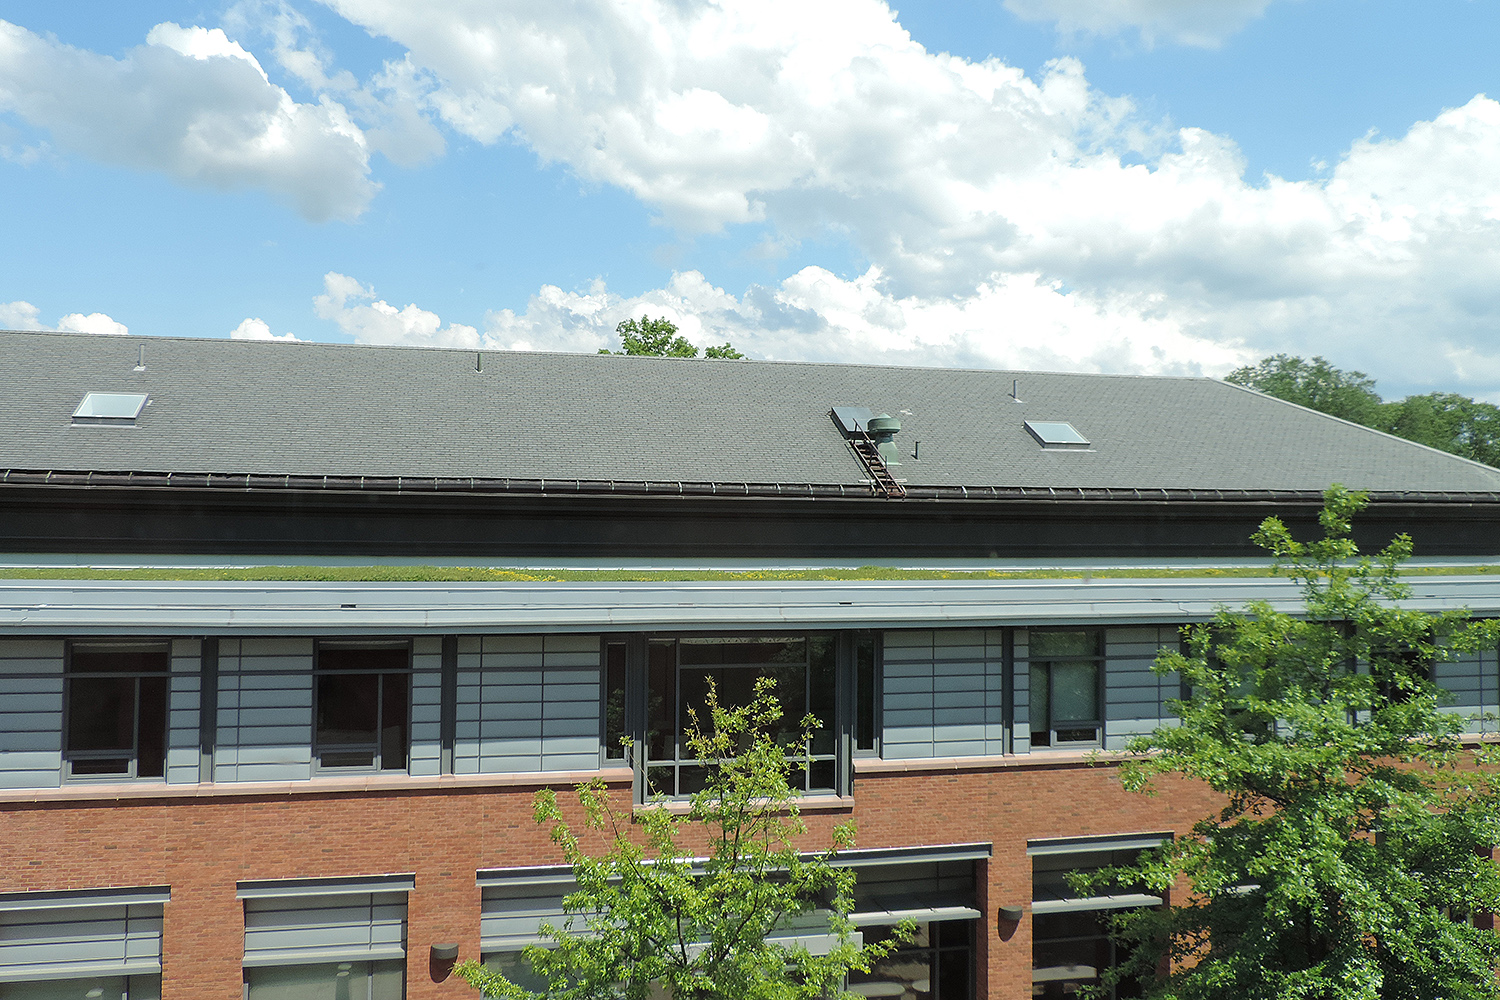 As part of Wesleyan's sustainability efforts, a 2,500 square foot "green roof" was planted on the top of Boger Hall. 